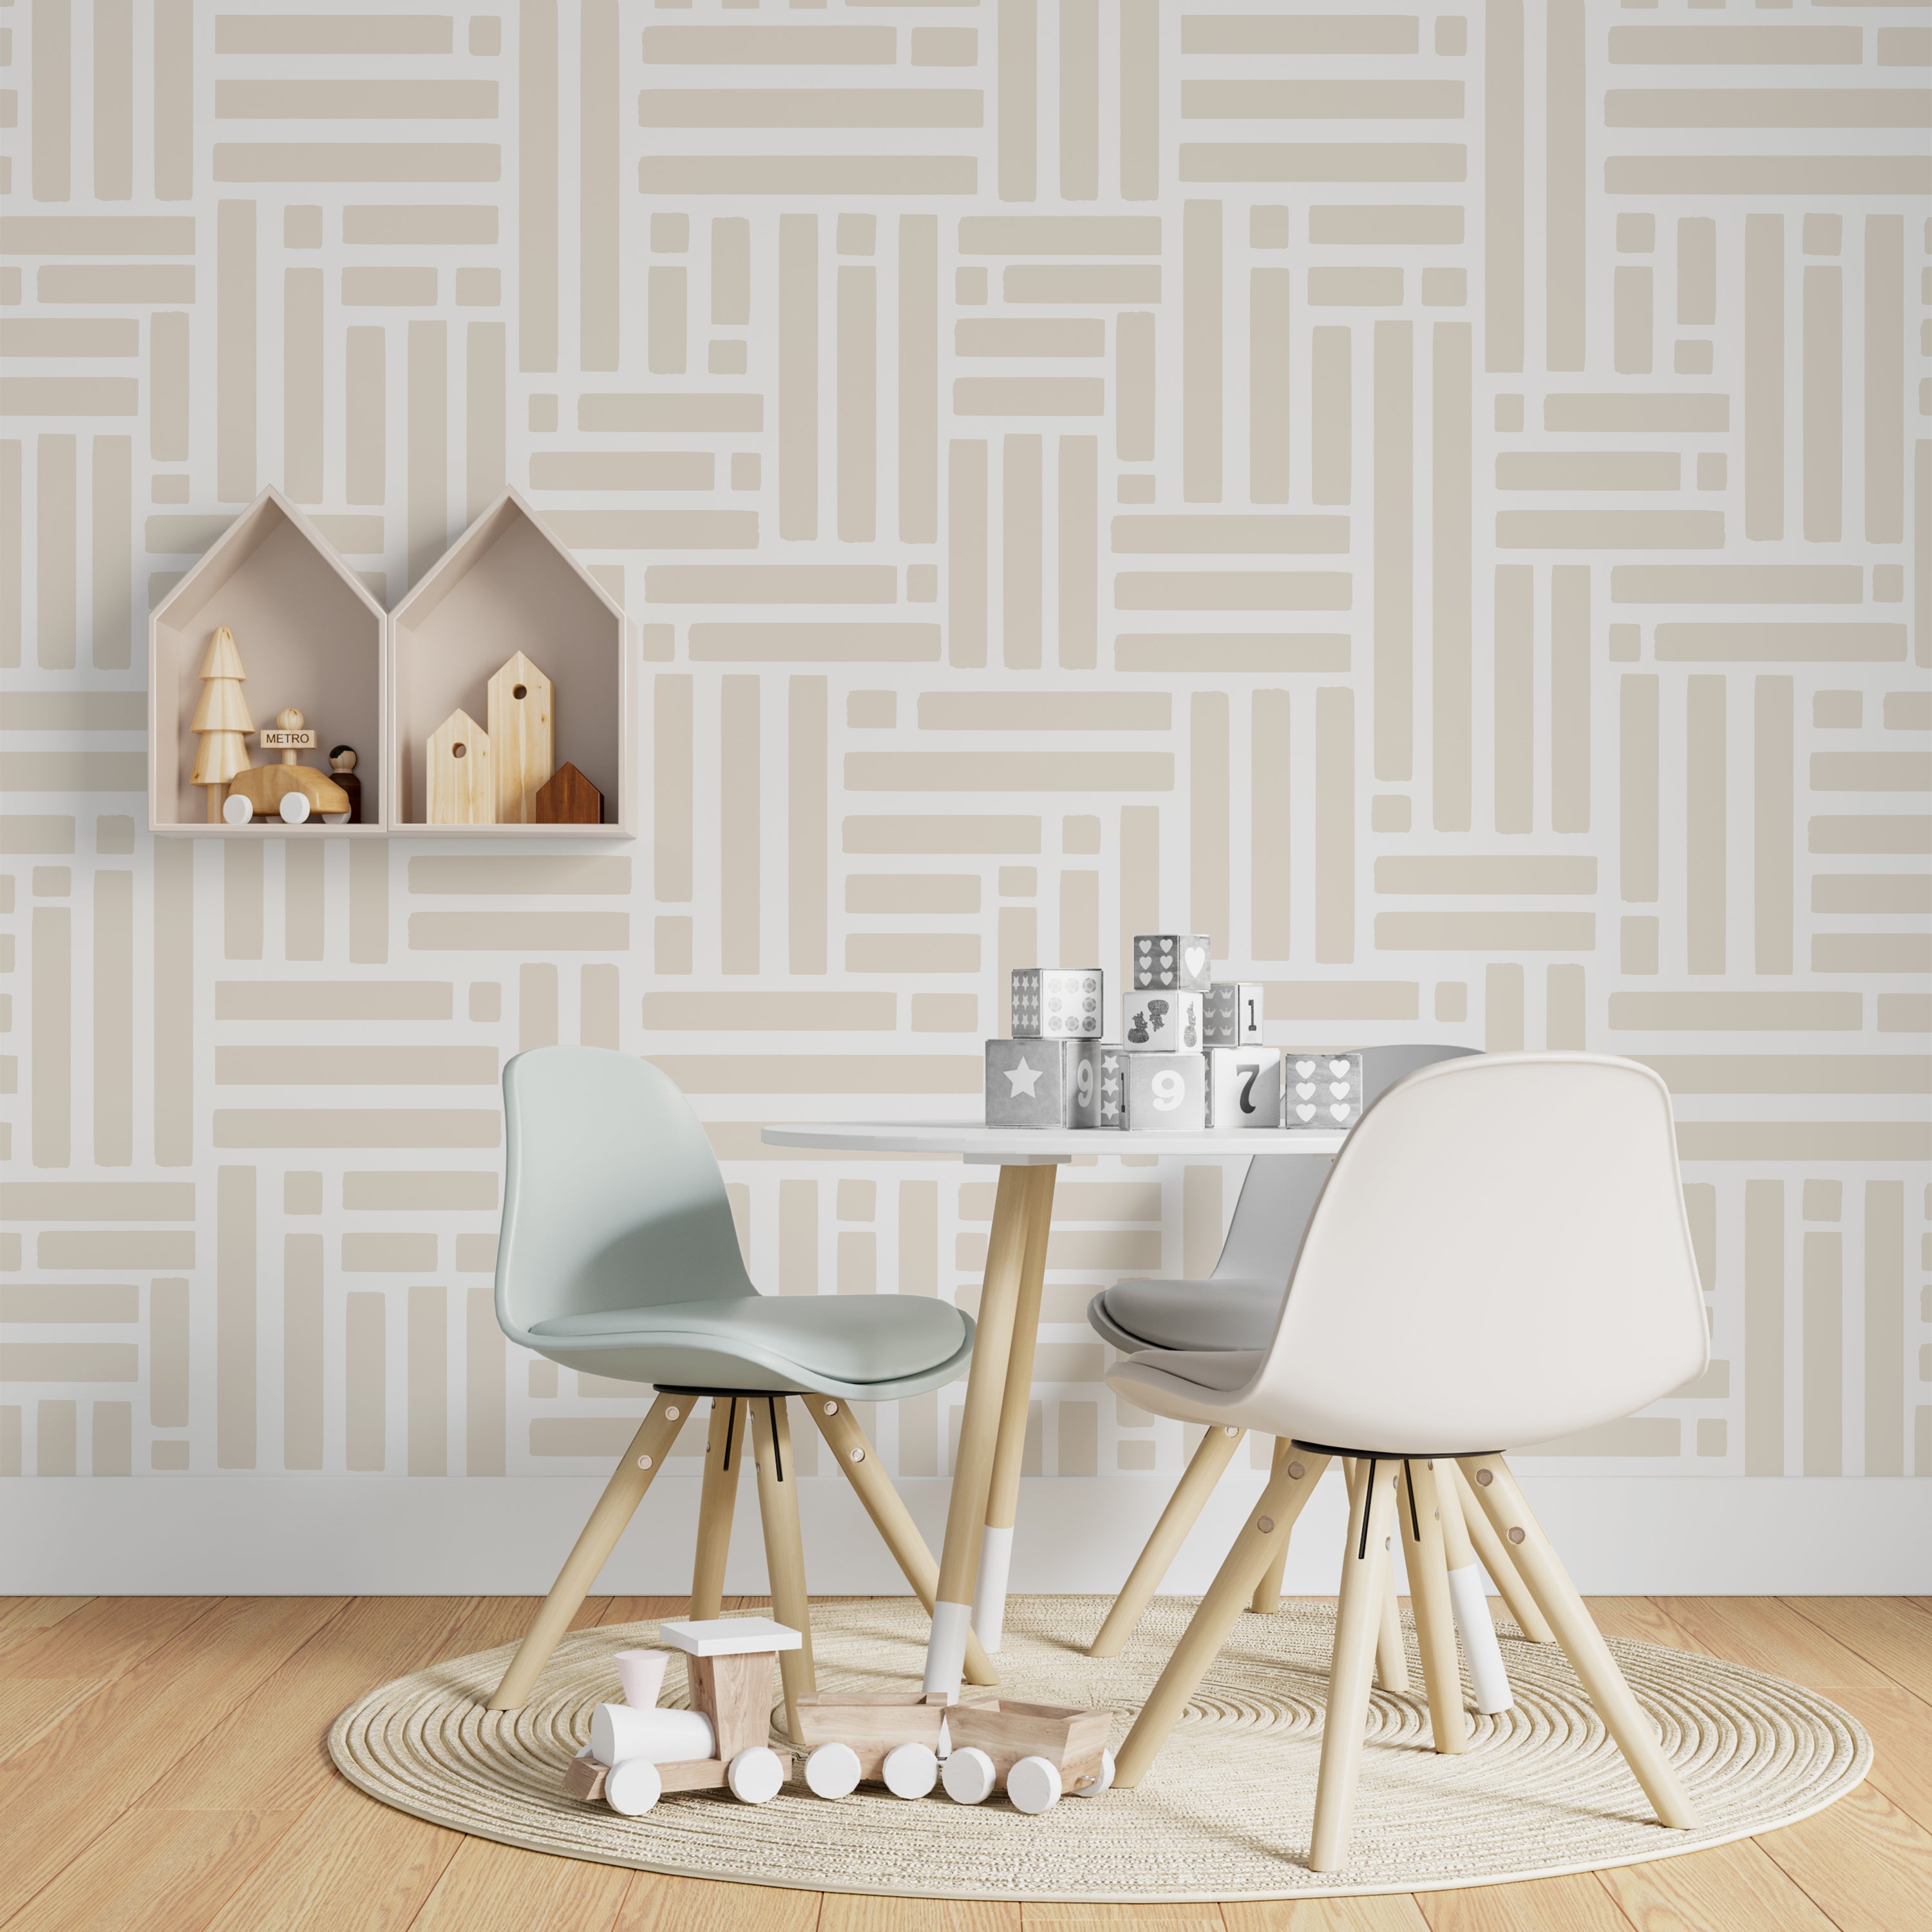 A contemporary children's play area with walls adorned with Organic Wallpaper 22, displaying a beige geometric pattern. The area is equipped with a small table and chairs, wooden toys, and educational blocks, ideal for a creative and engaging space.